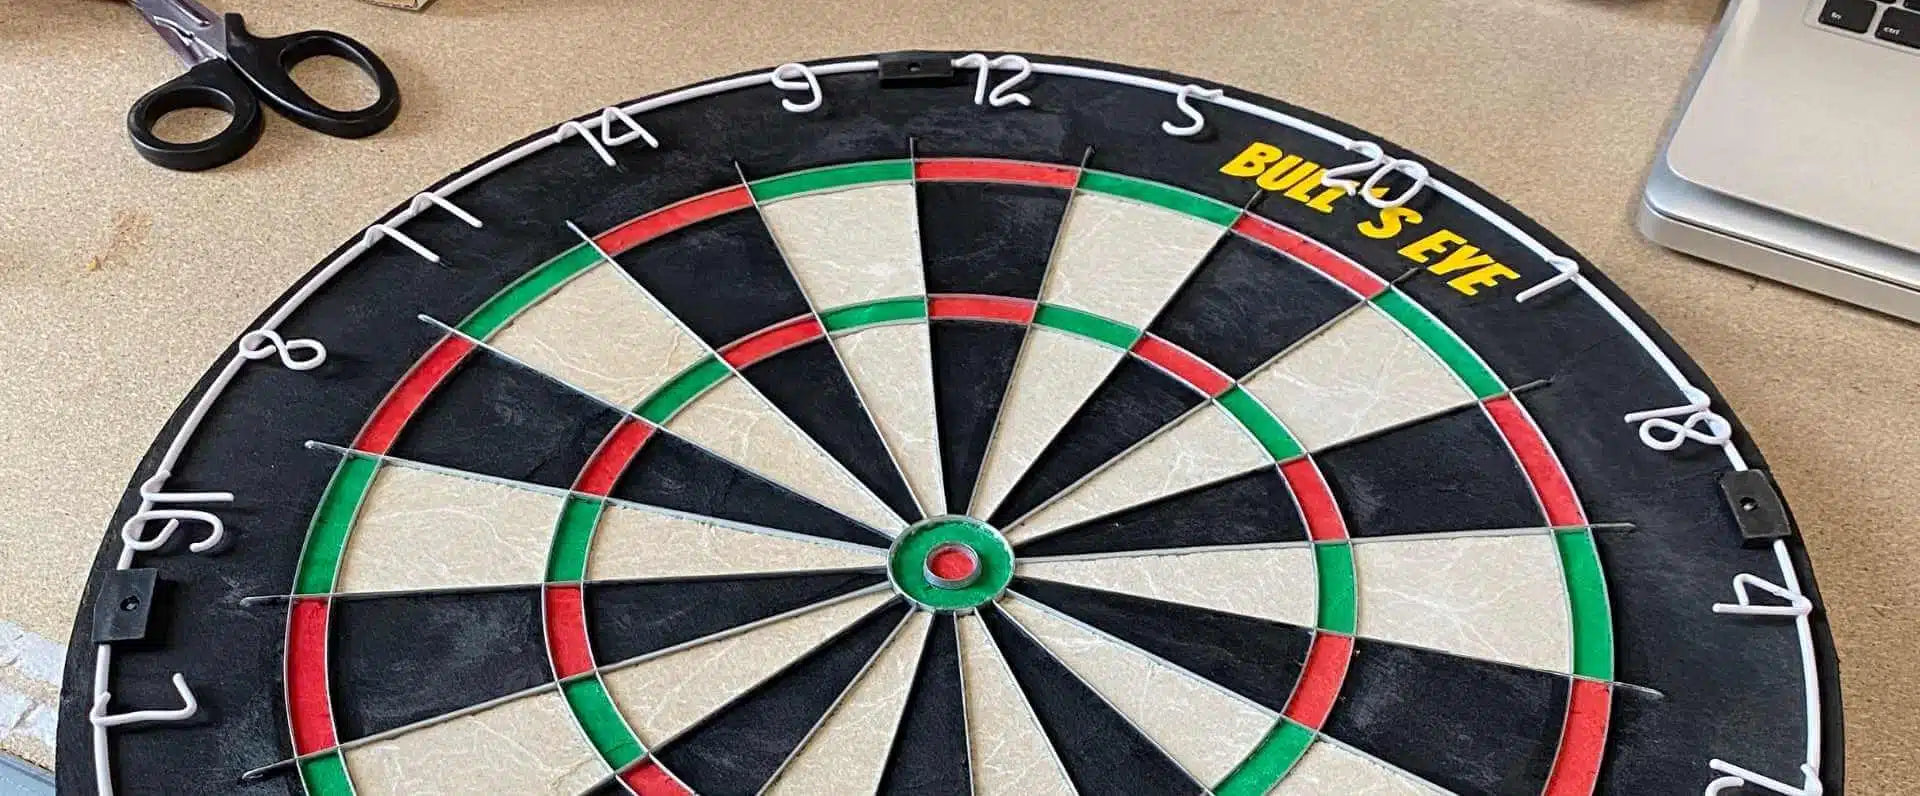 Hanging up the dartboard: Tips for wall mounting 🎯